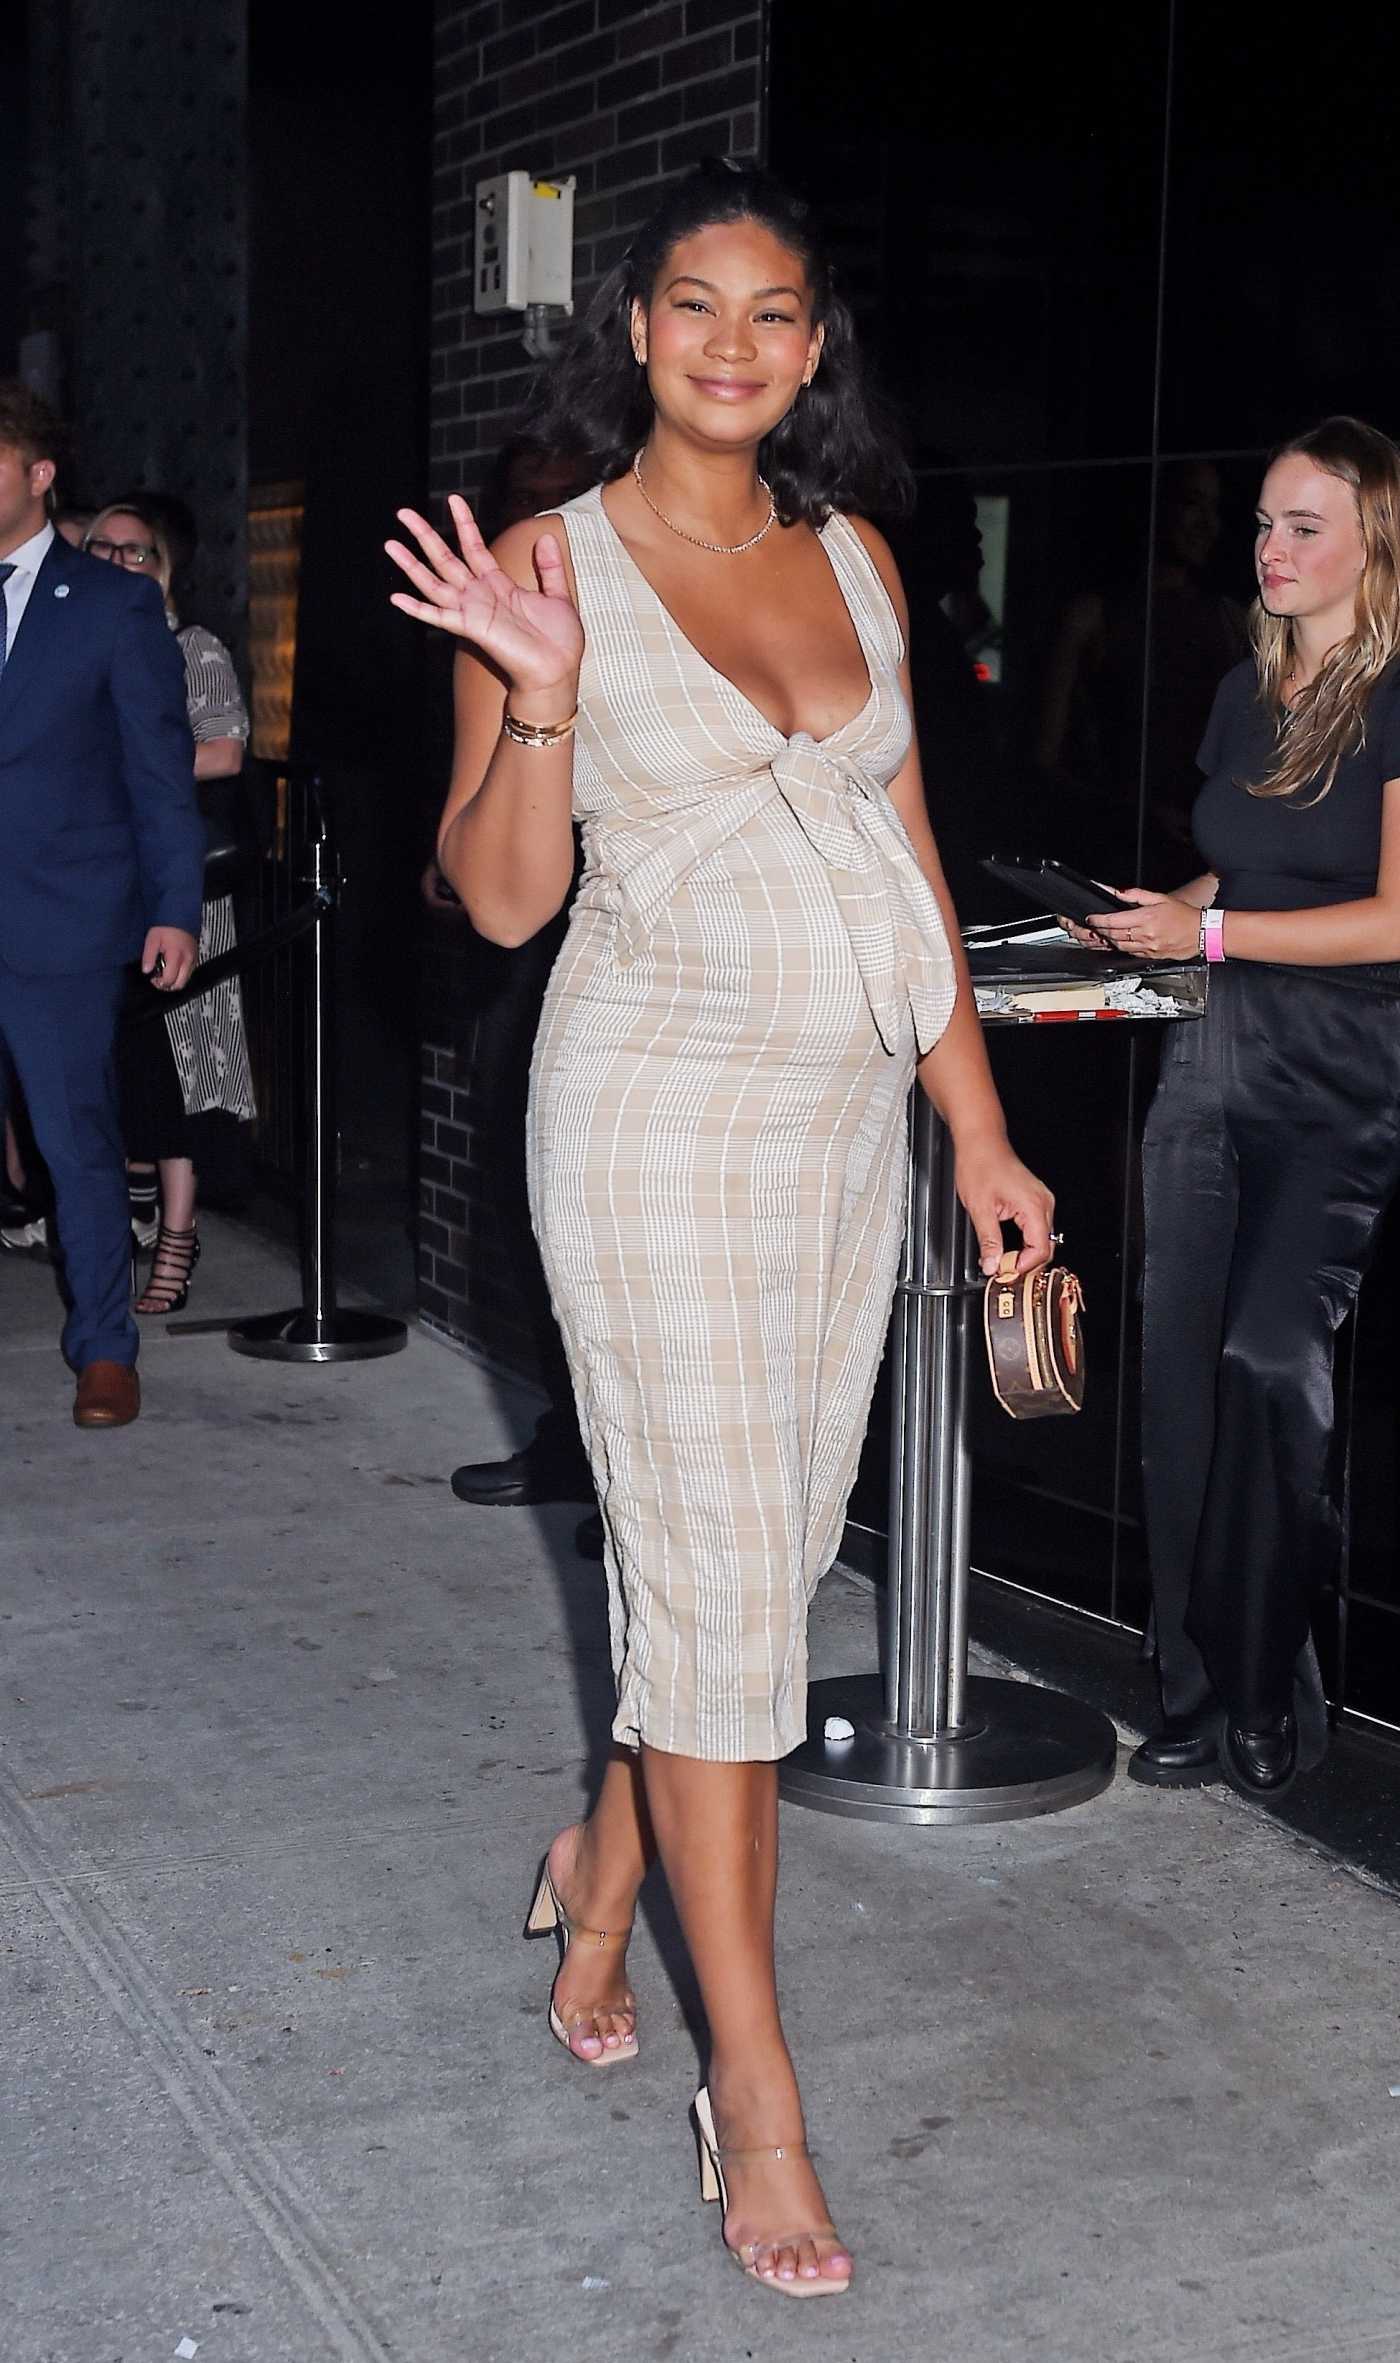 Chanel Iman Arrives at the Boom Boom Room for an Expedia Event in New York 07/18/2023